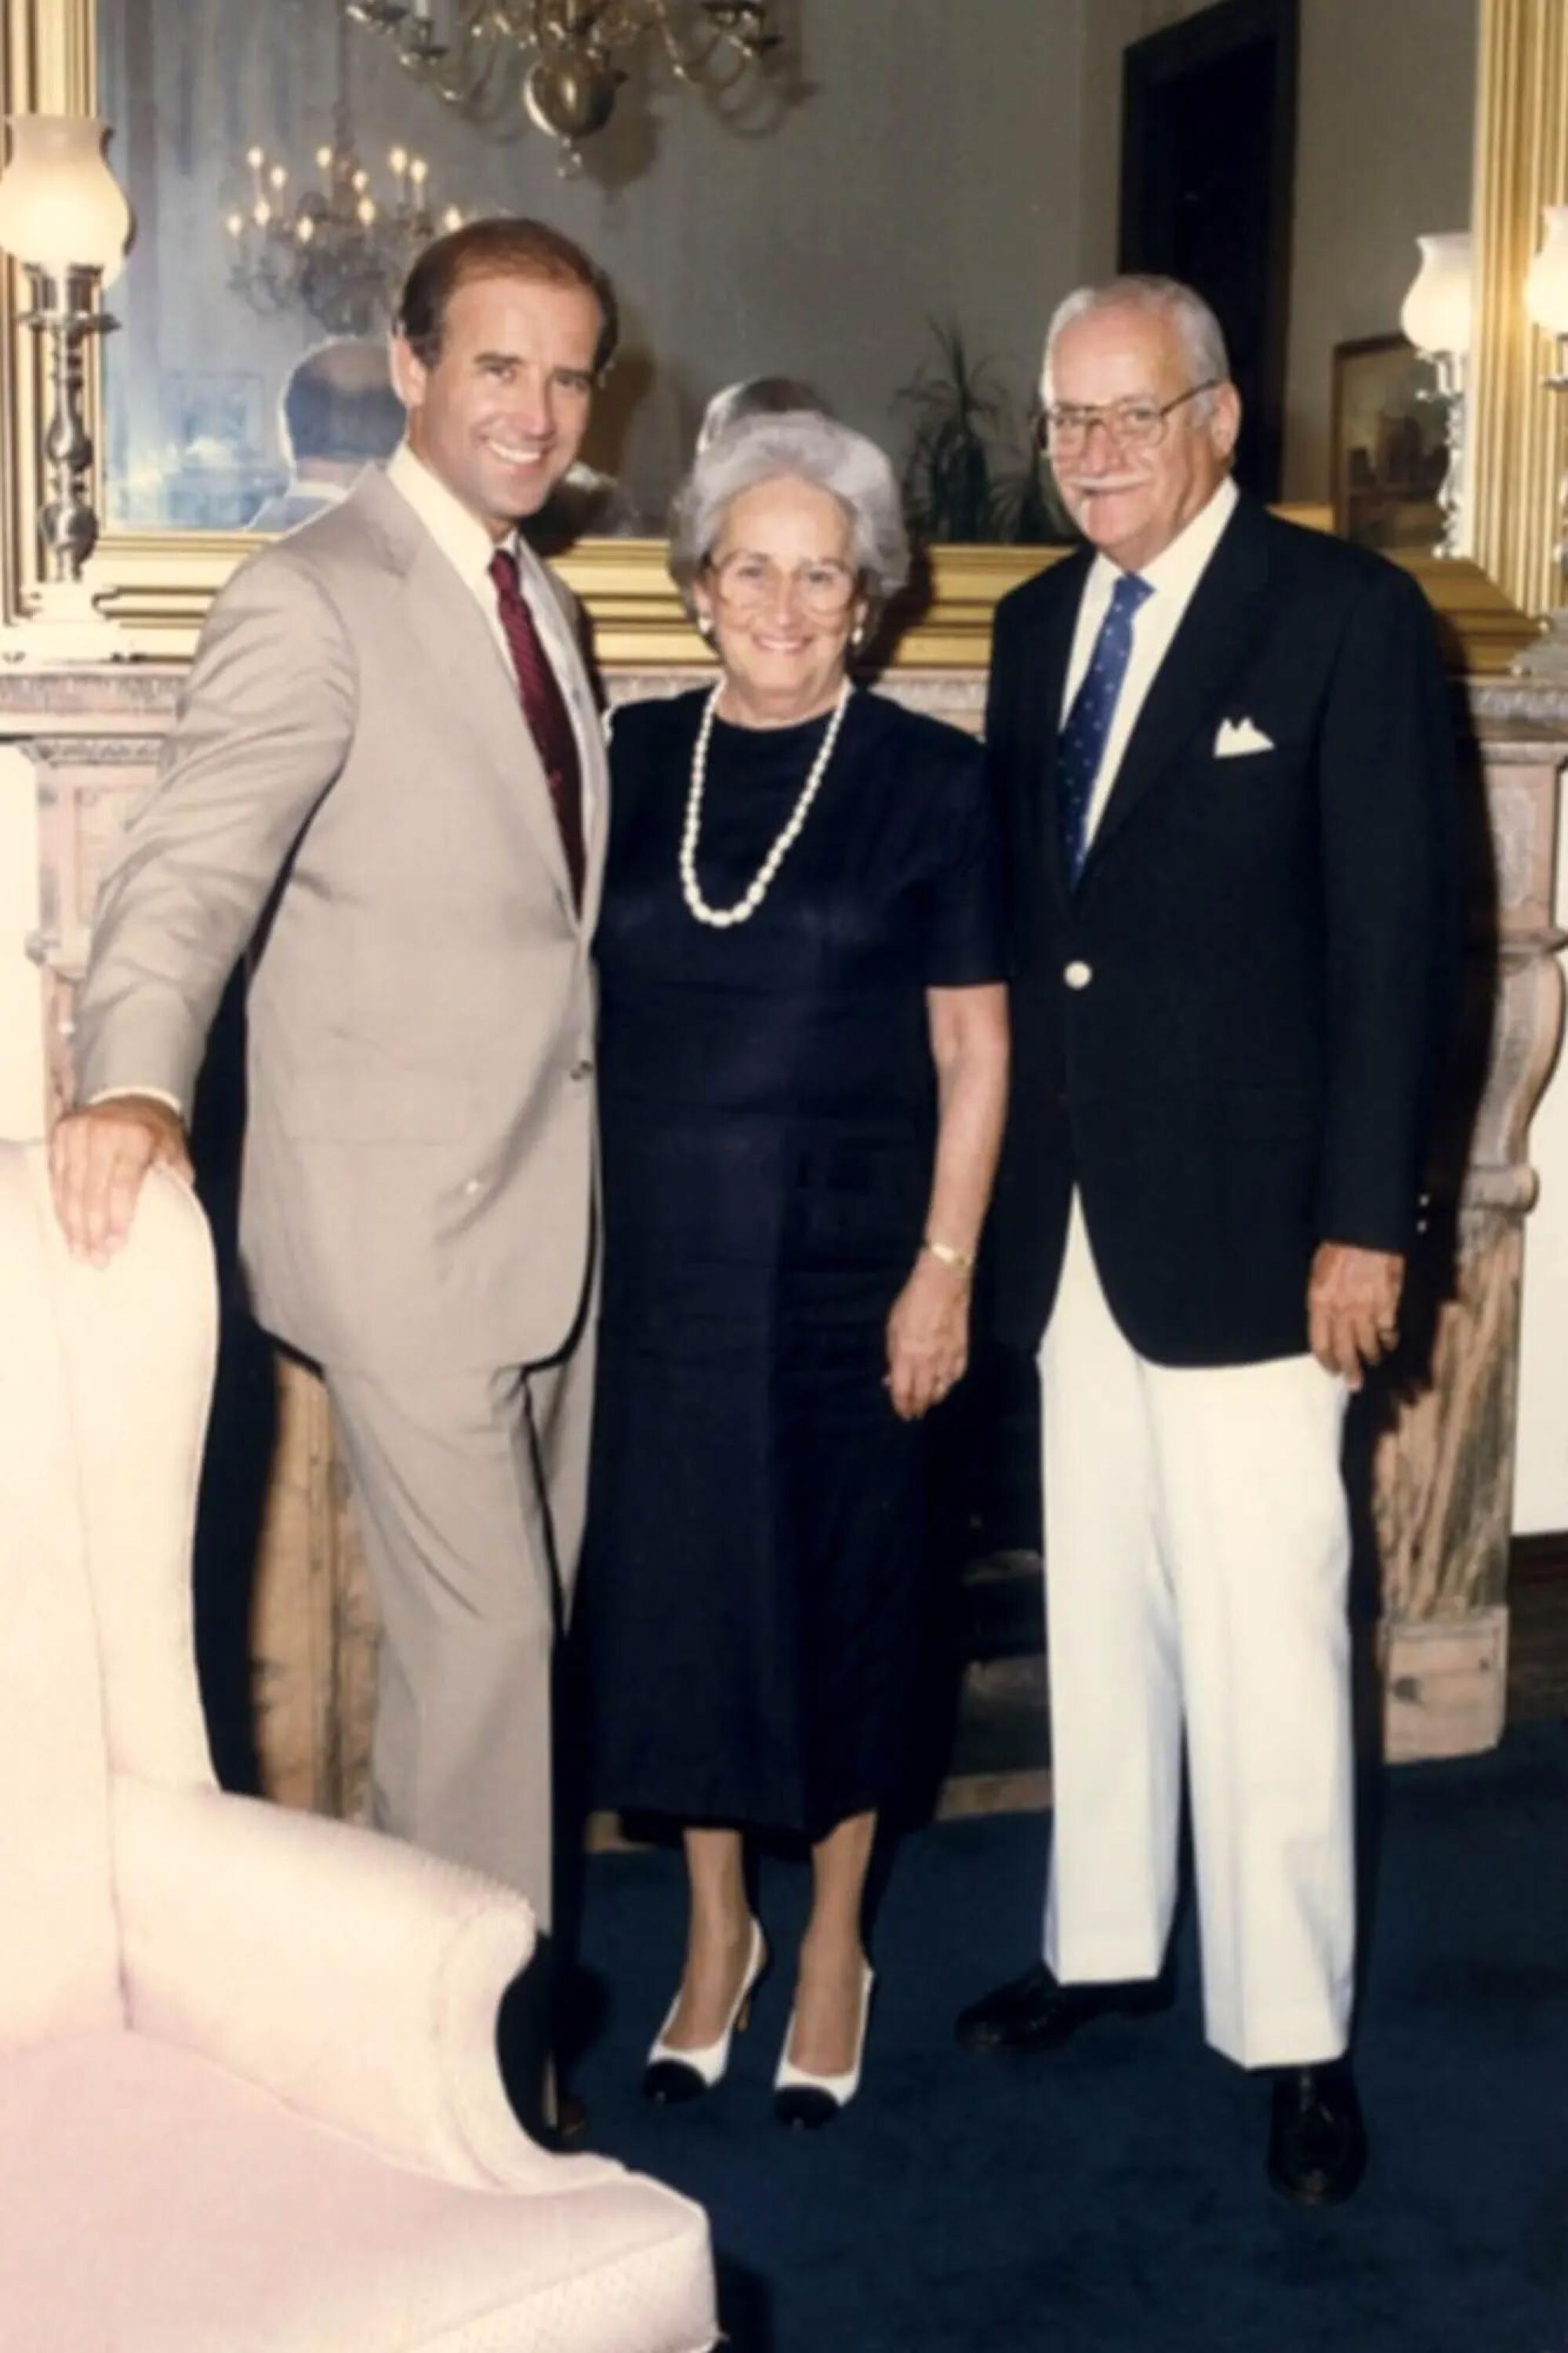 A man in a tan-colored suit and tie, left, stands next to a woman in a dark dress and a man in a dark jacket and white pants 